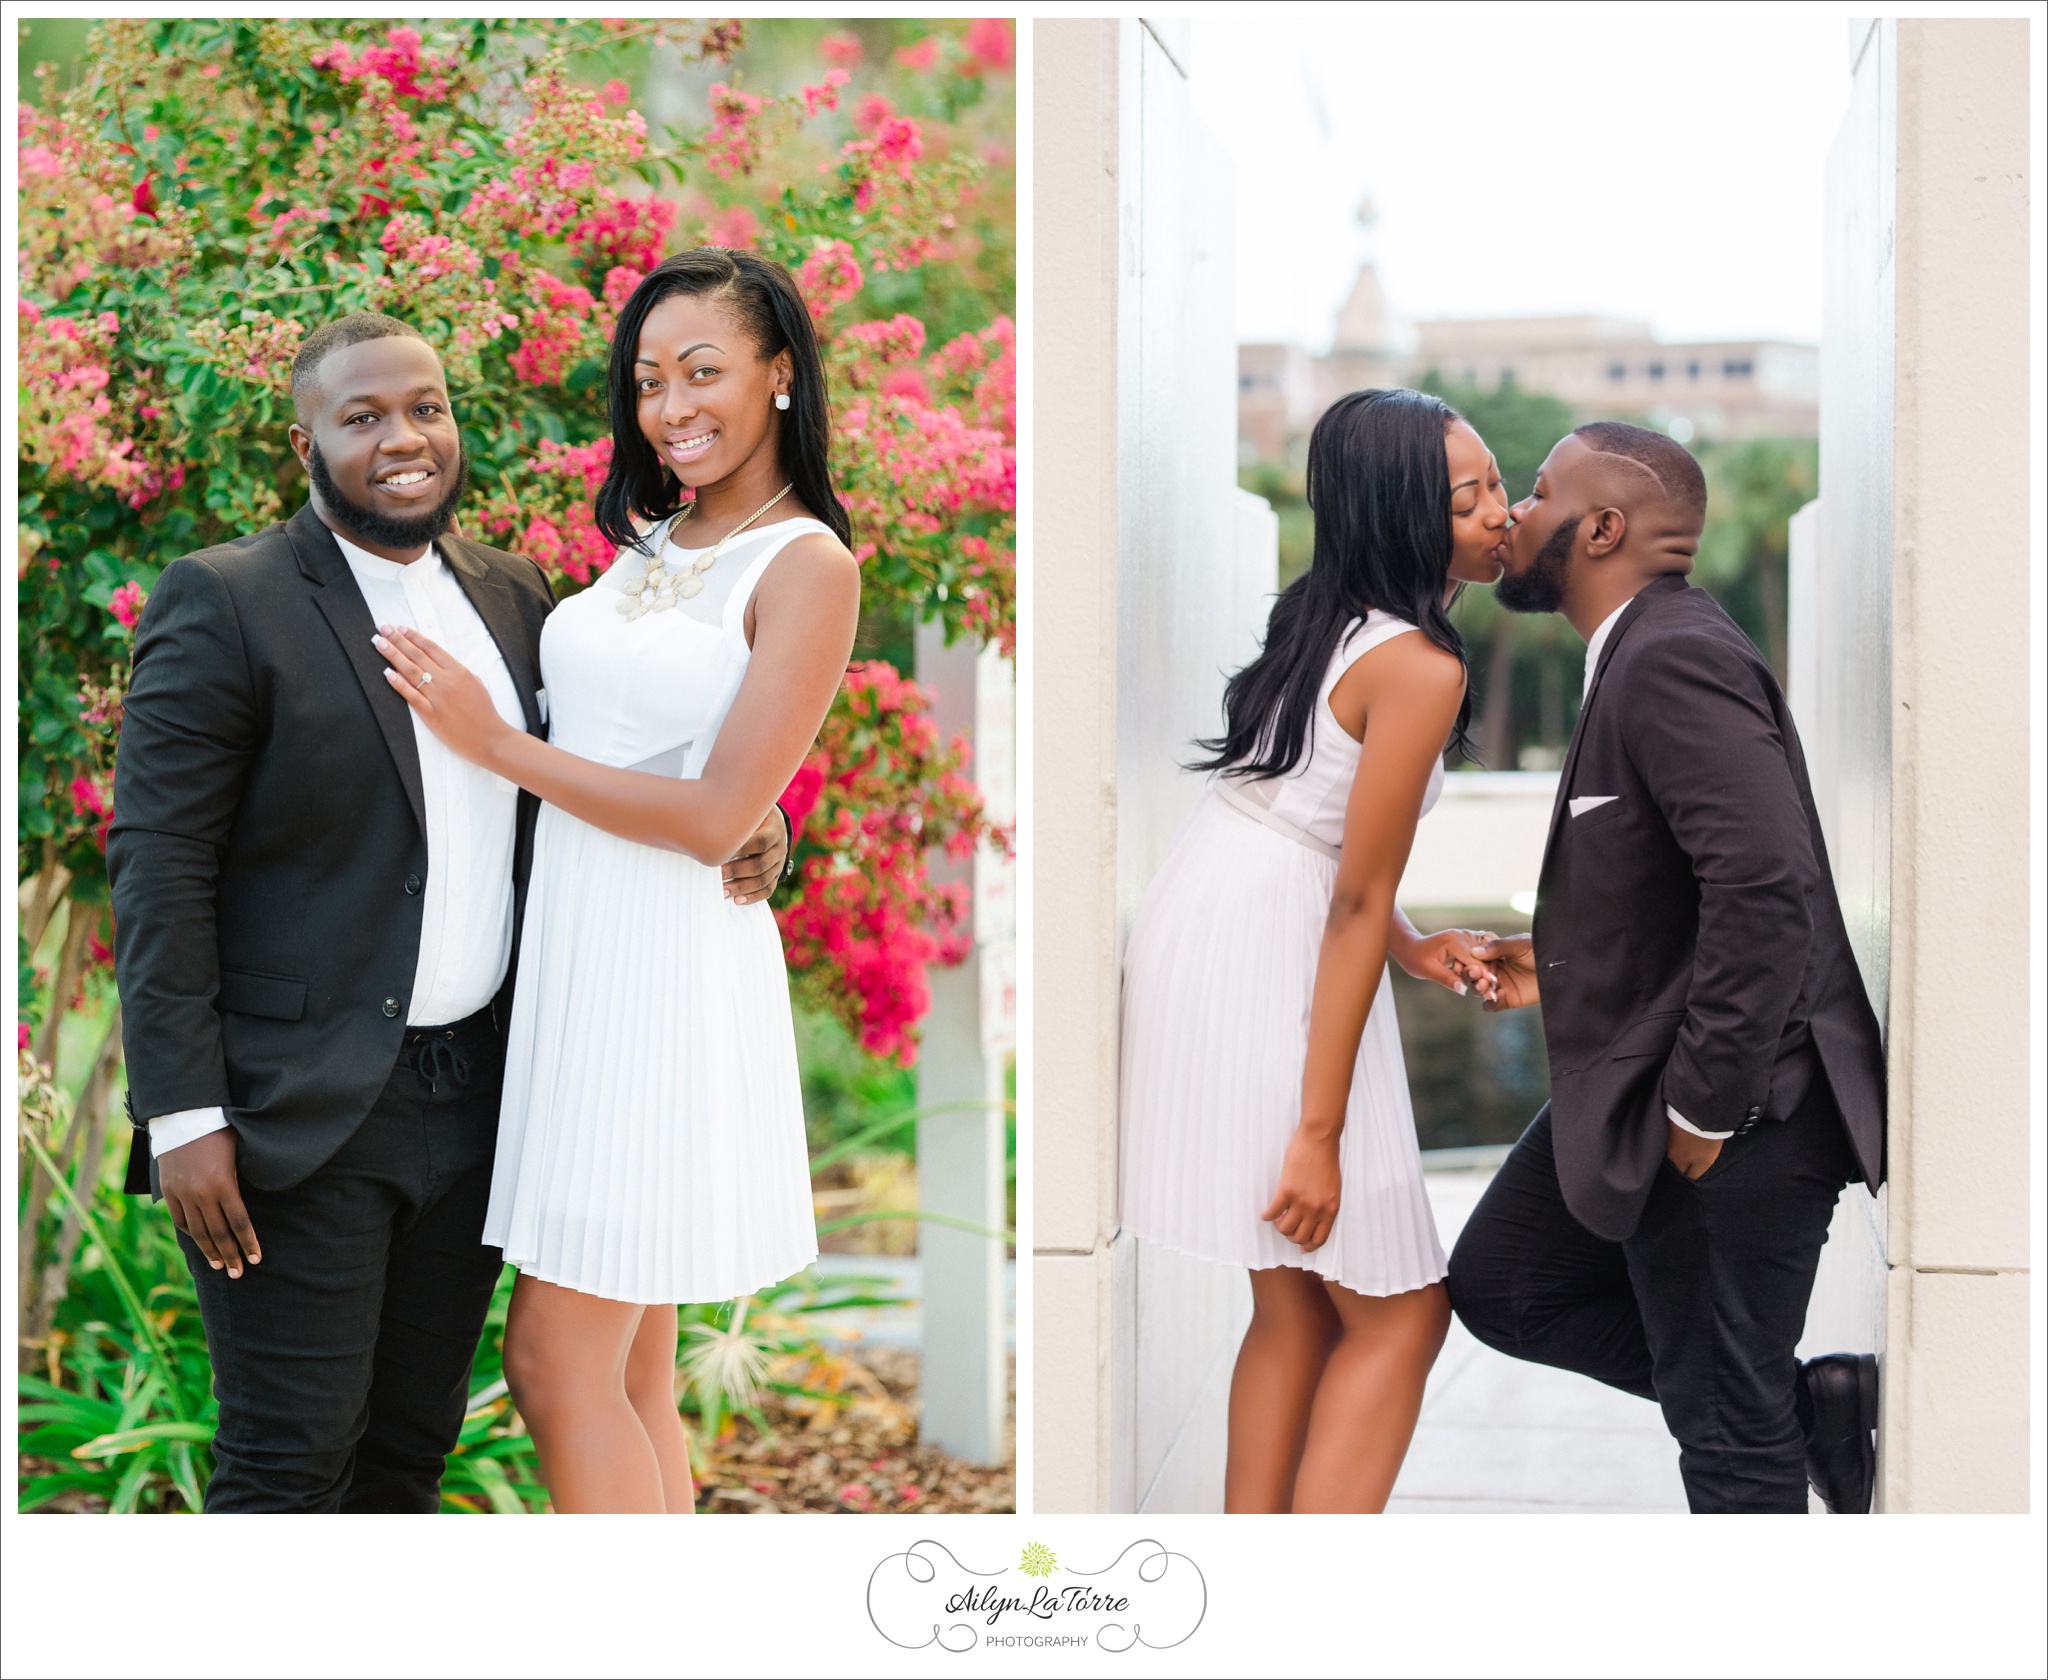 University of Tampa Engagement | © Ailyn La Torre Photography 2014